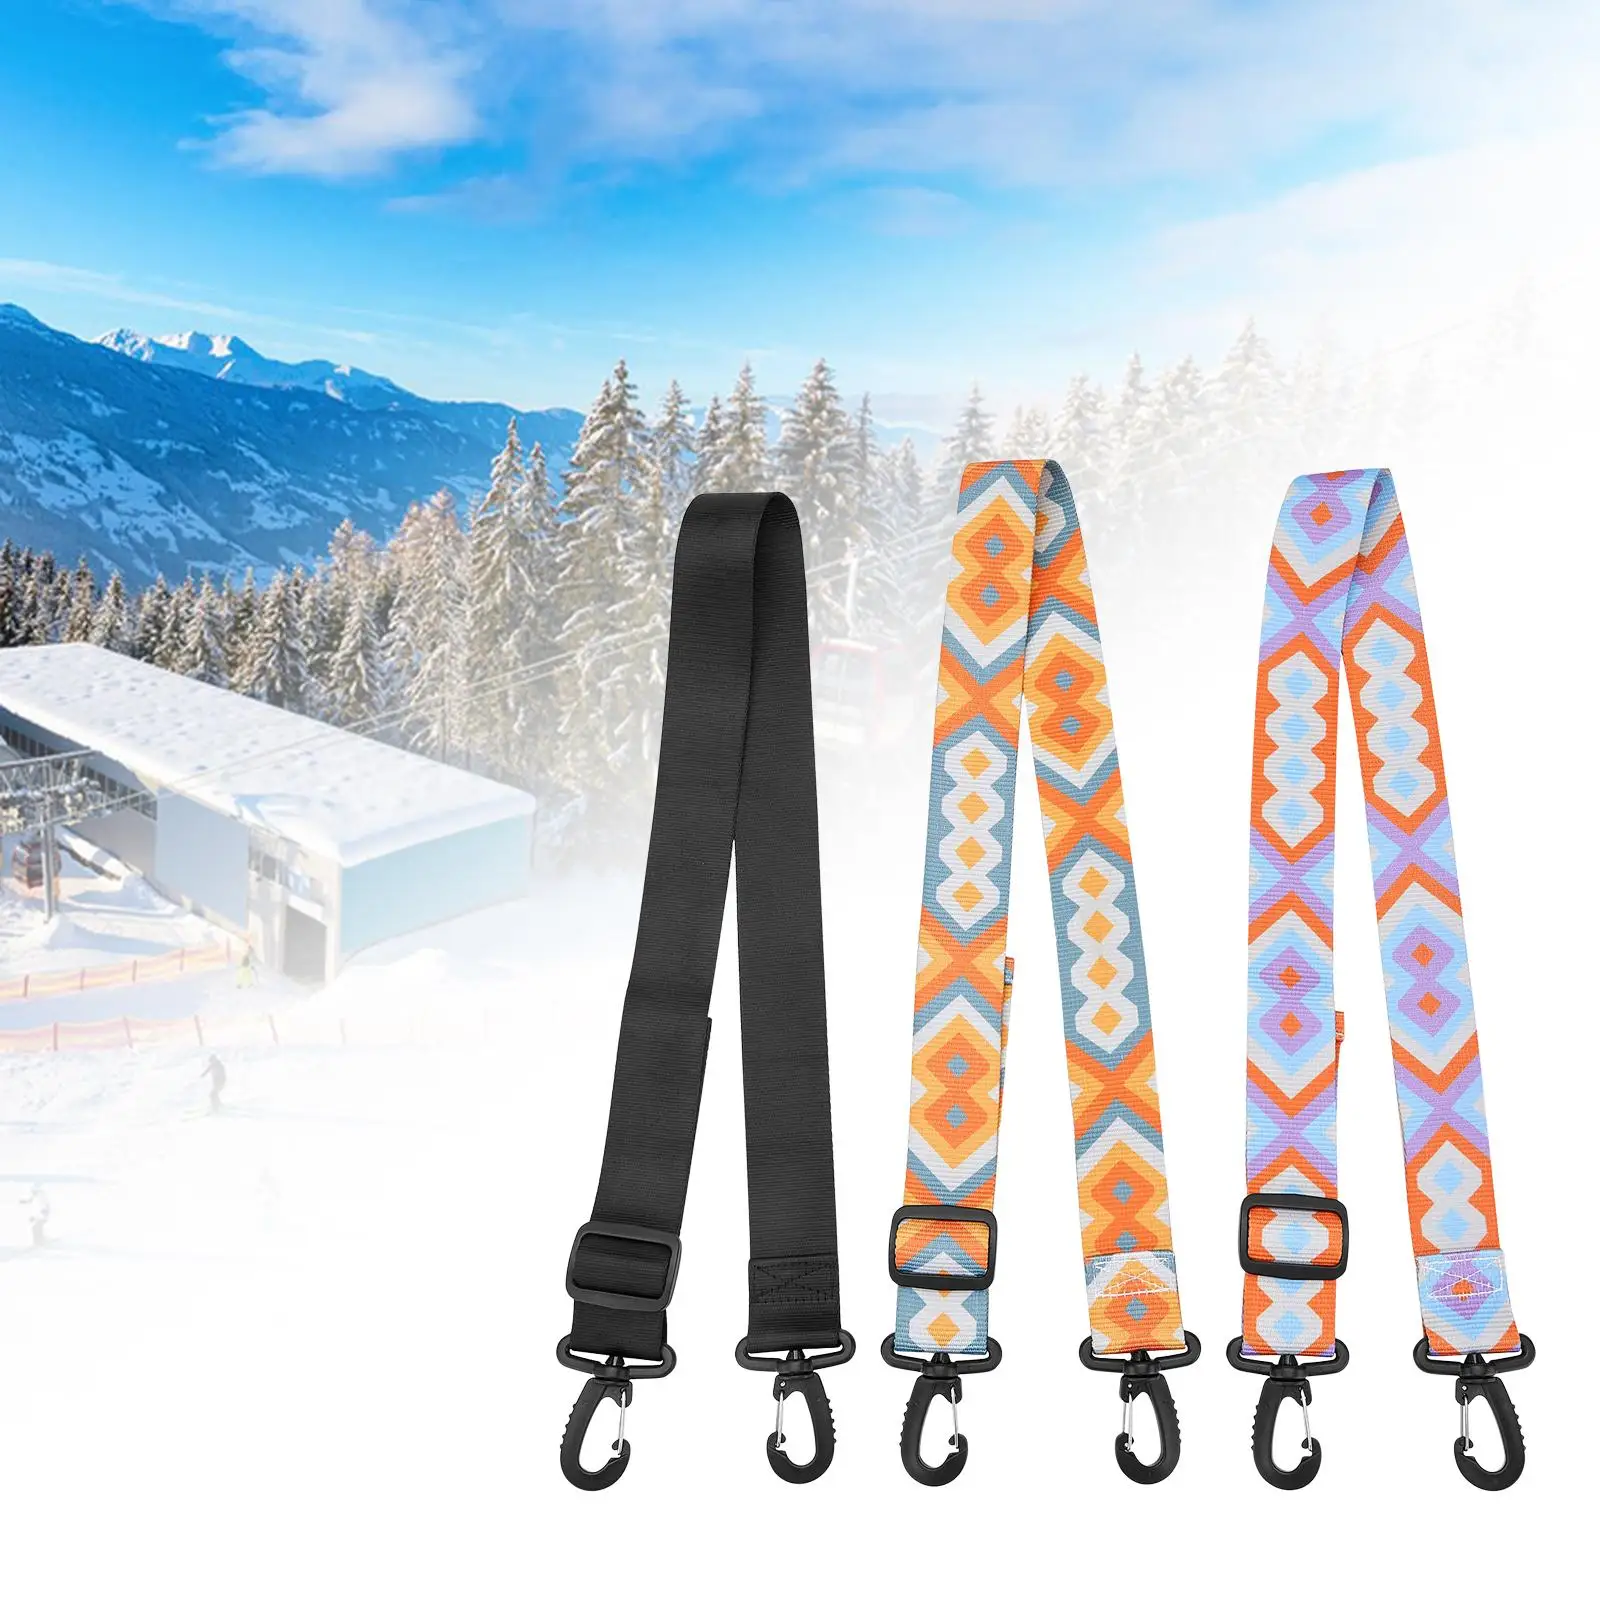 Ski Boot Strap Roller Skating Carrying Tool Snowboard Strap with Hook Ski Boot Carrier Straps for Skiing Bags Accessories